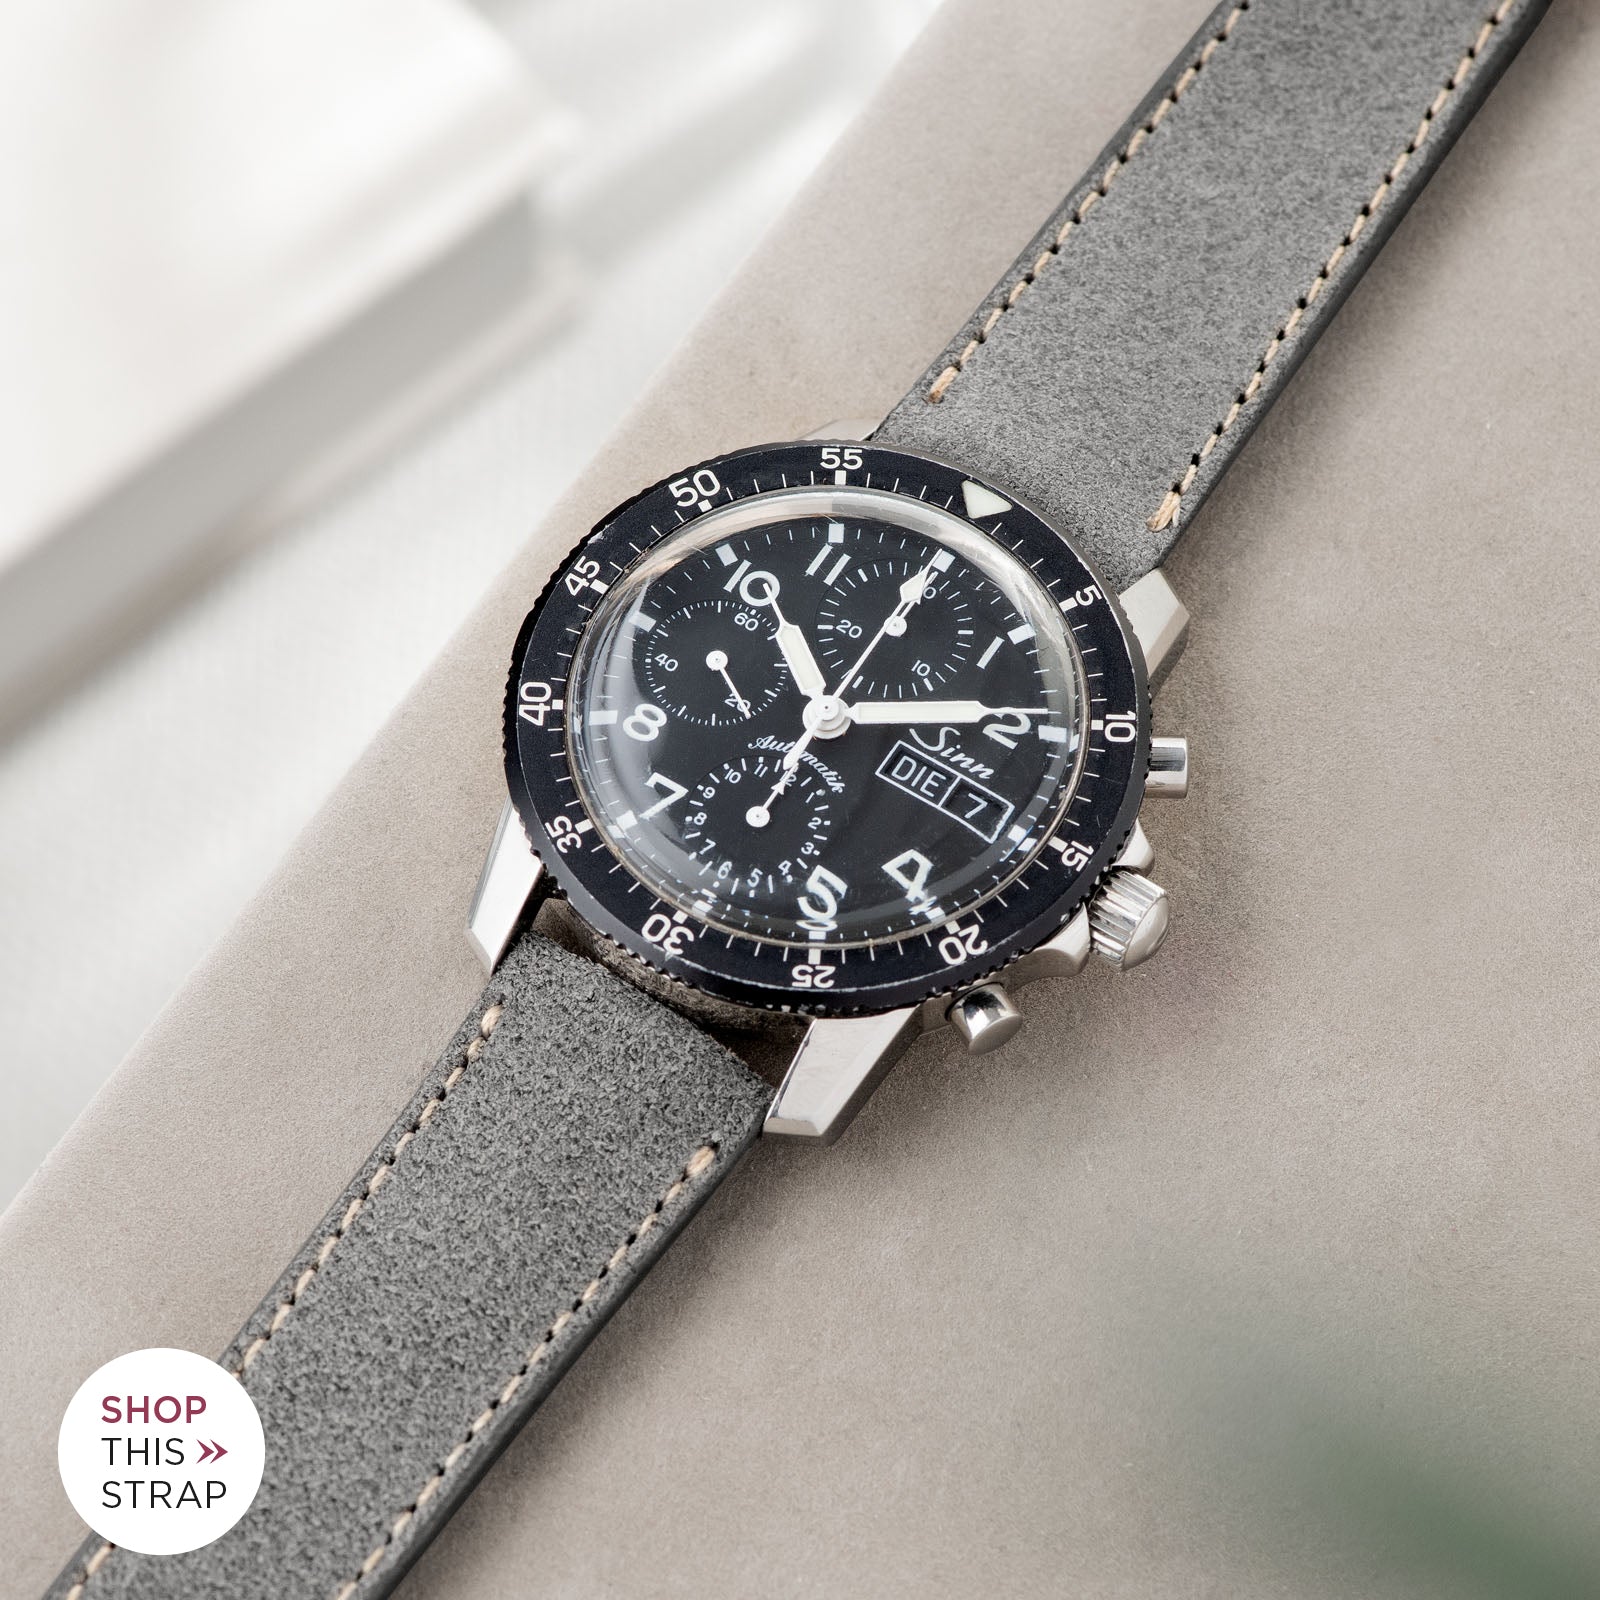 Bulang and Sons_Strap Guide_Sinn 103St Flieder Chronograph_Refined Rugged Grey Leather Watch Strap